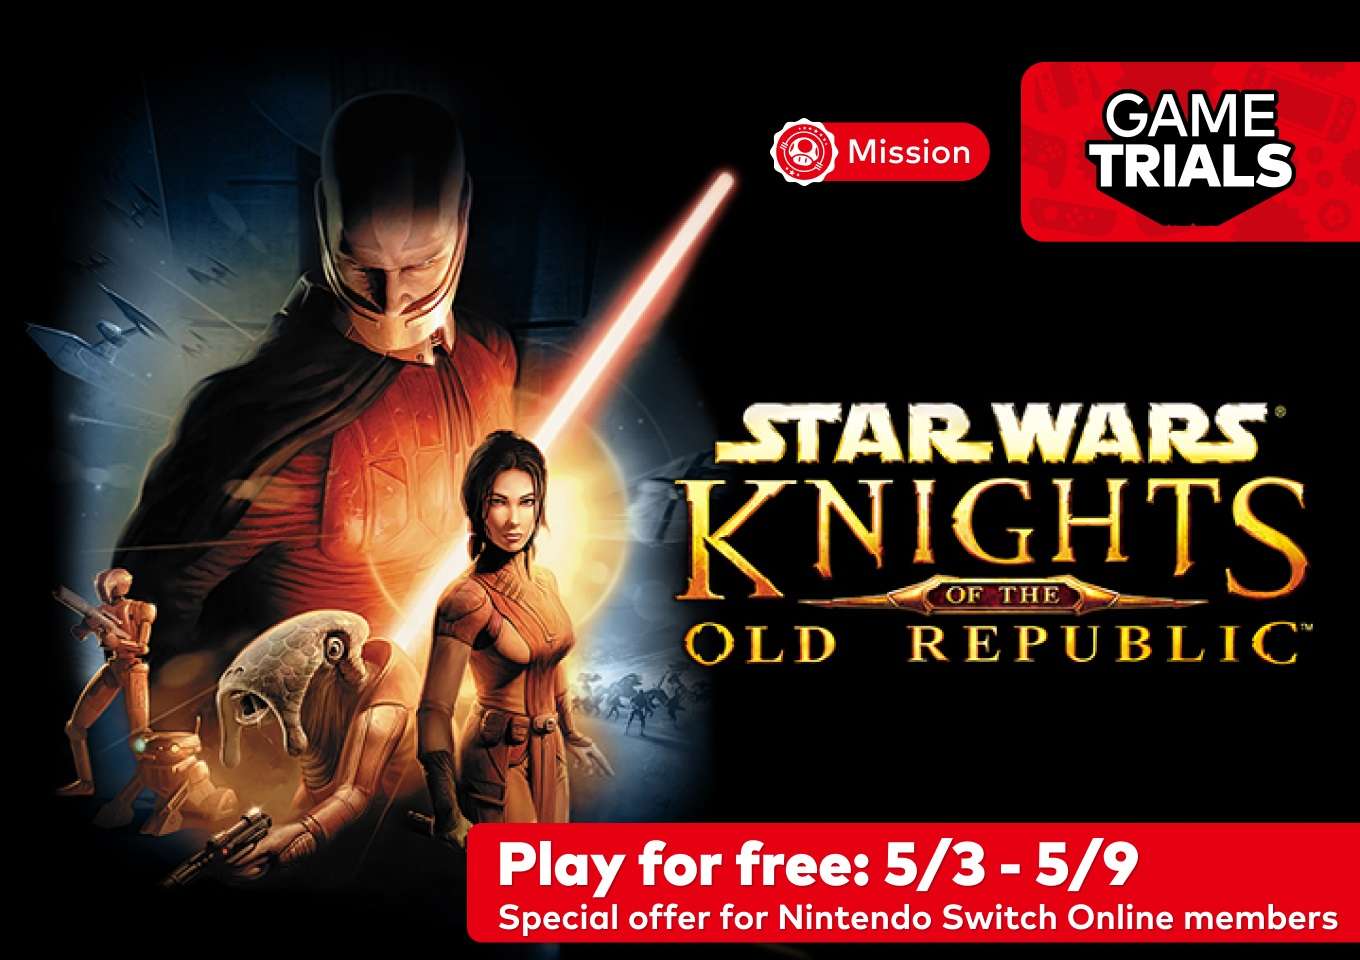 Try Out STAR WARS: Knights of the Old Republic Free Game Trial for Nintendo Switch until May 9th